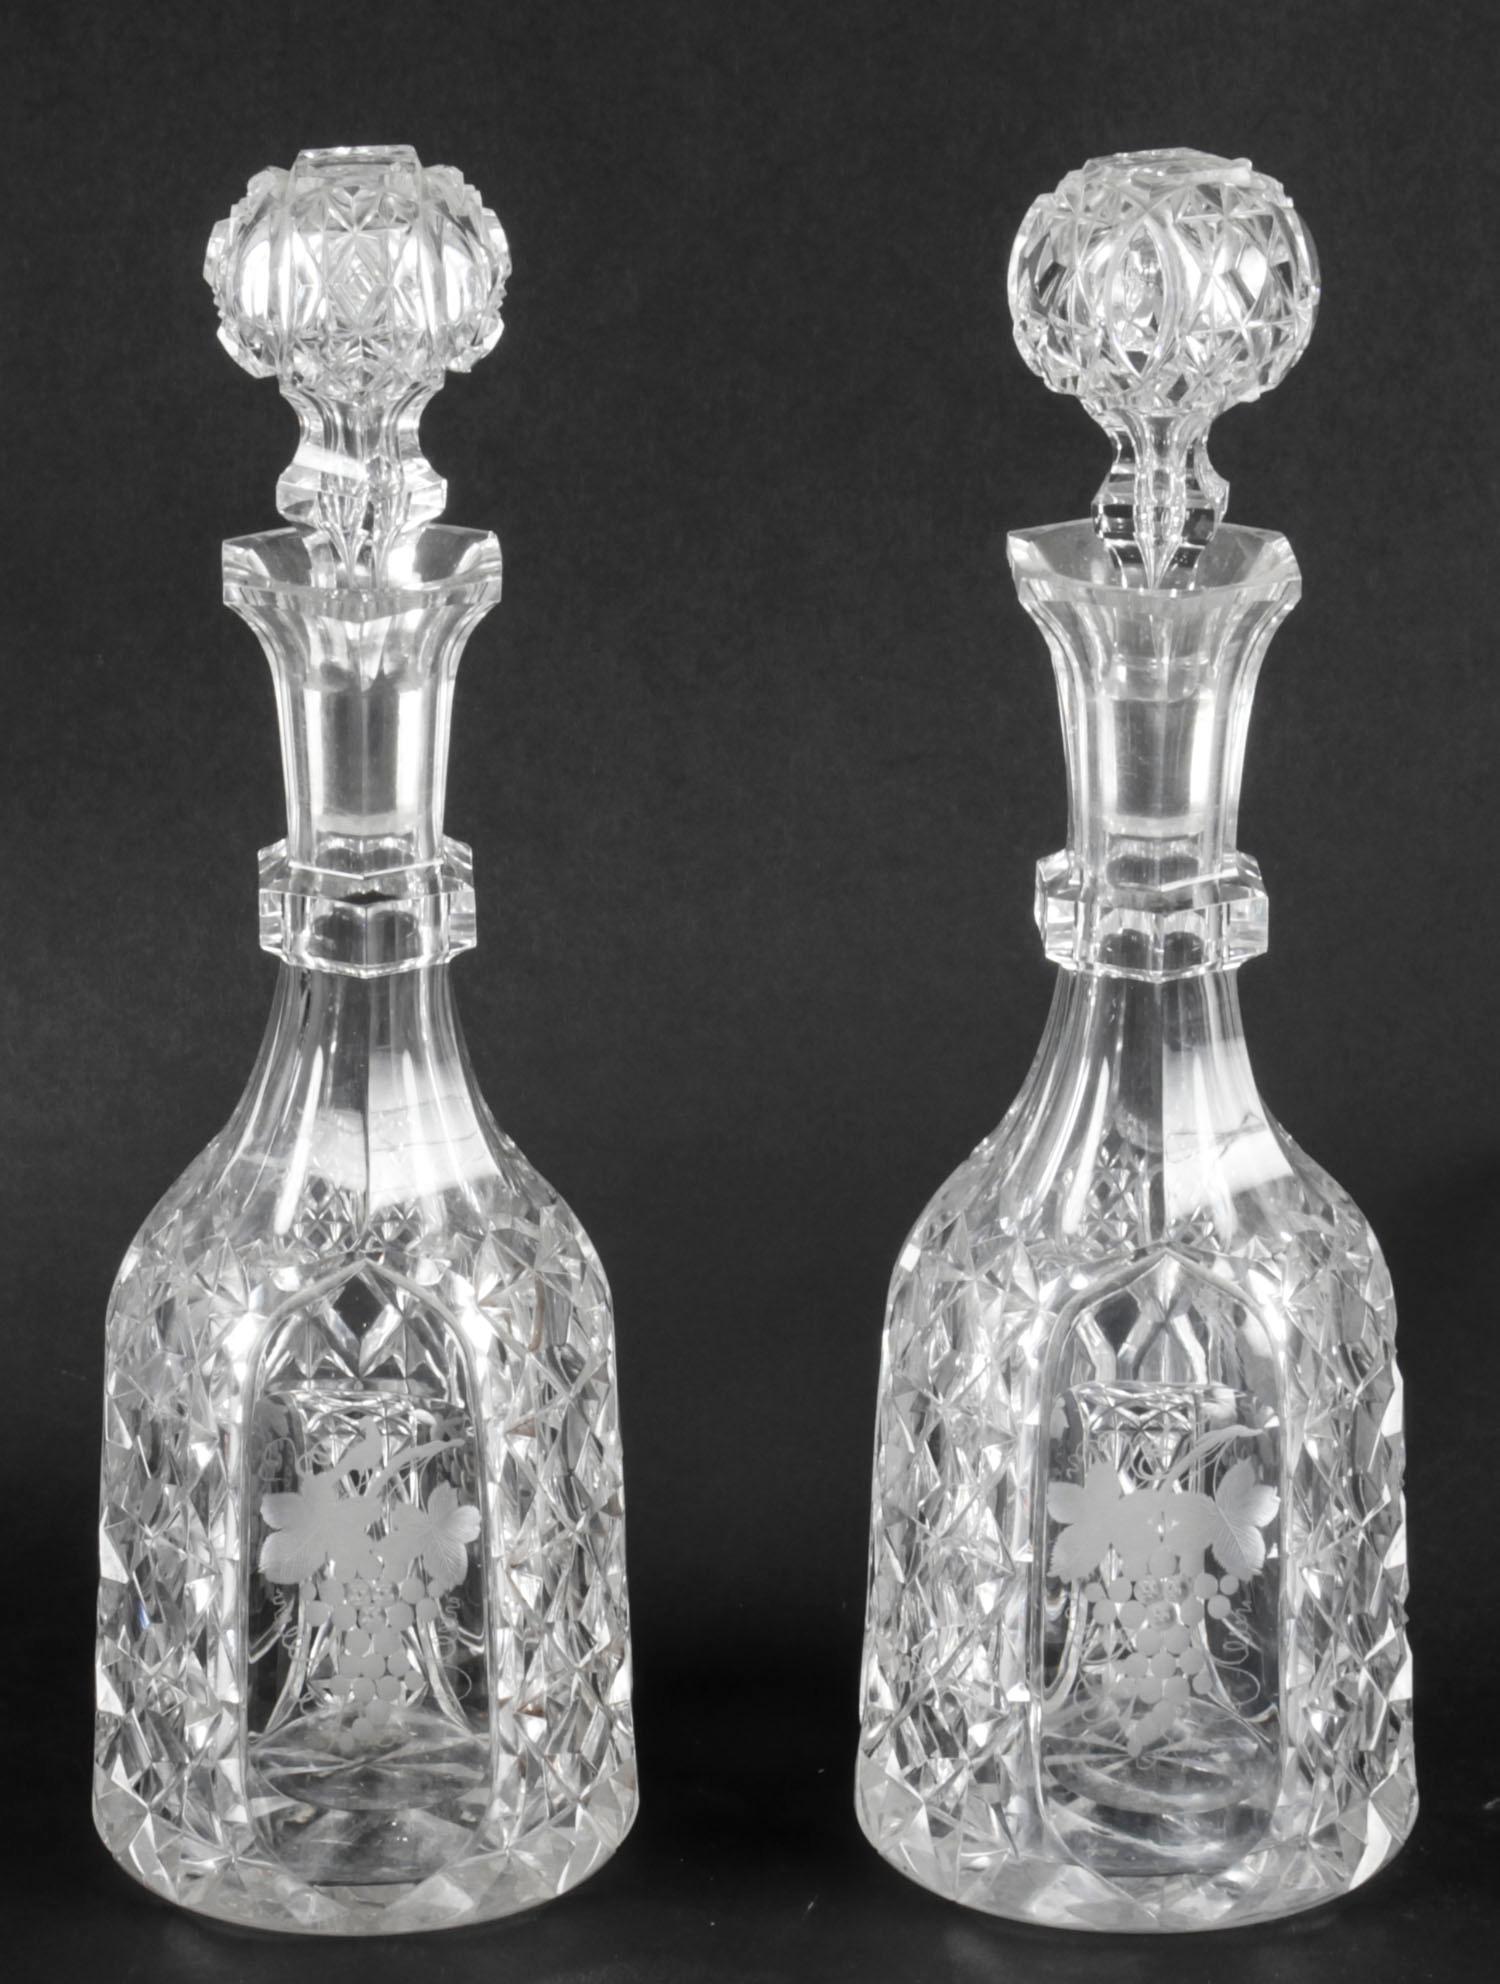 Antique Pair of Cut Glass Decanters and Stoppers 19th Century 6